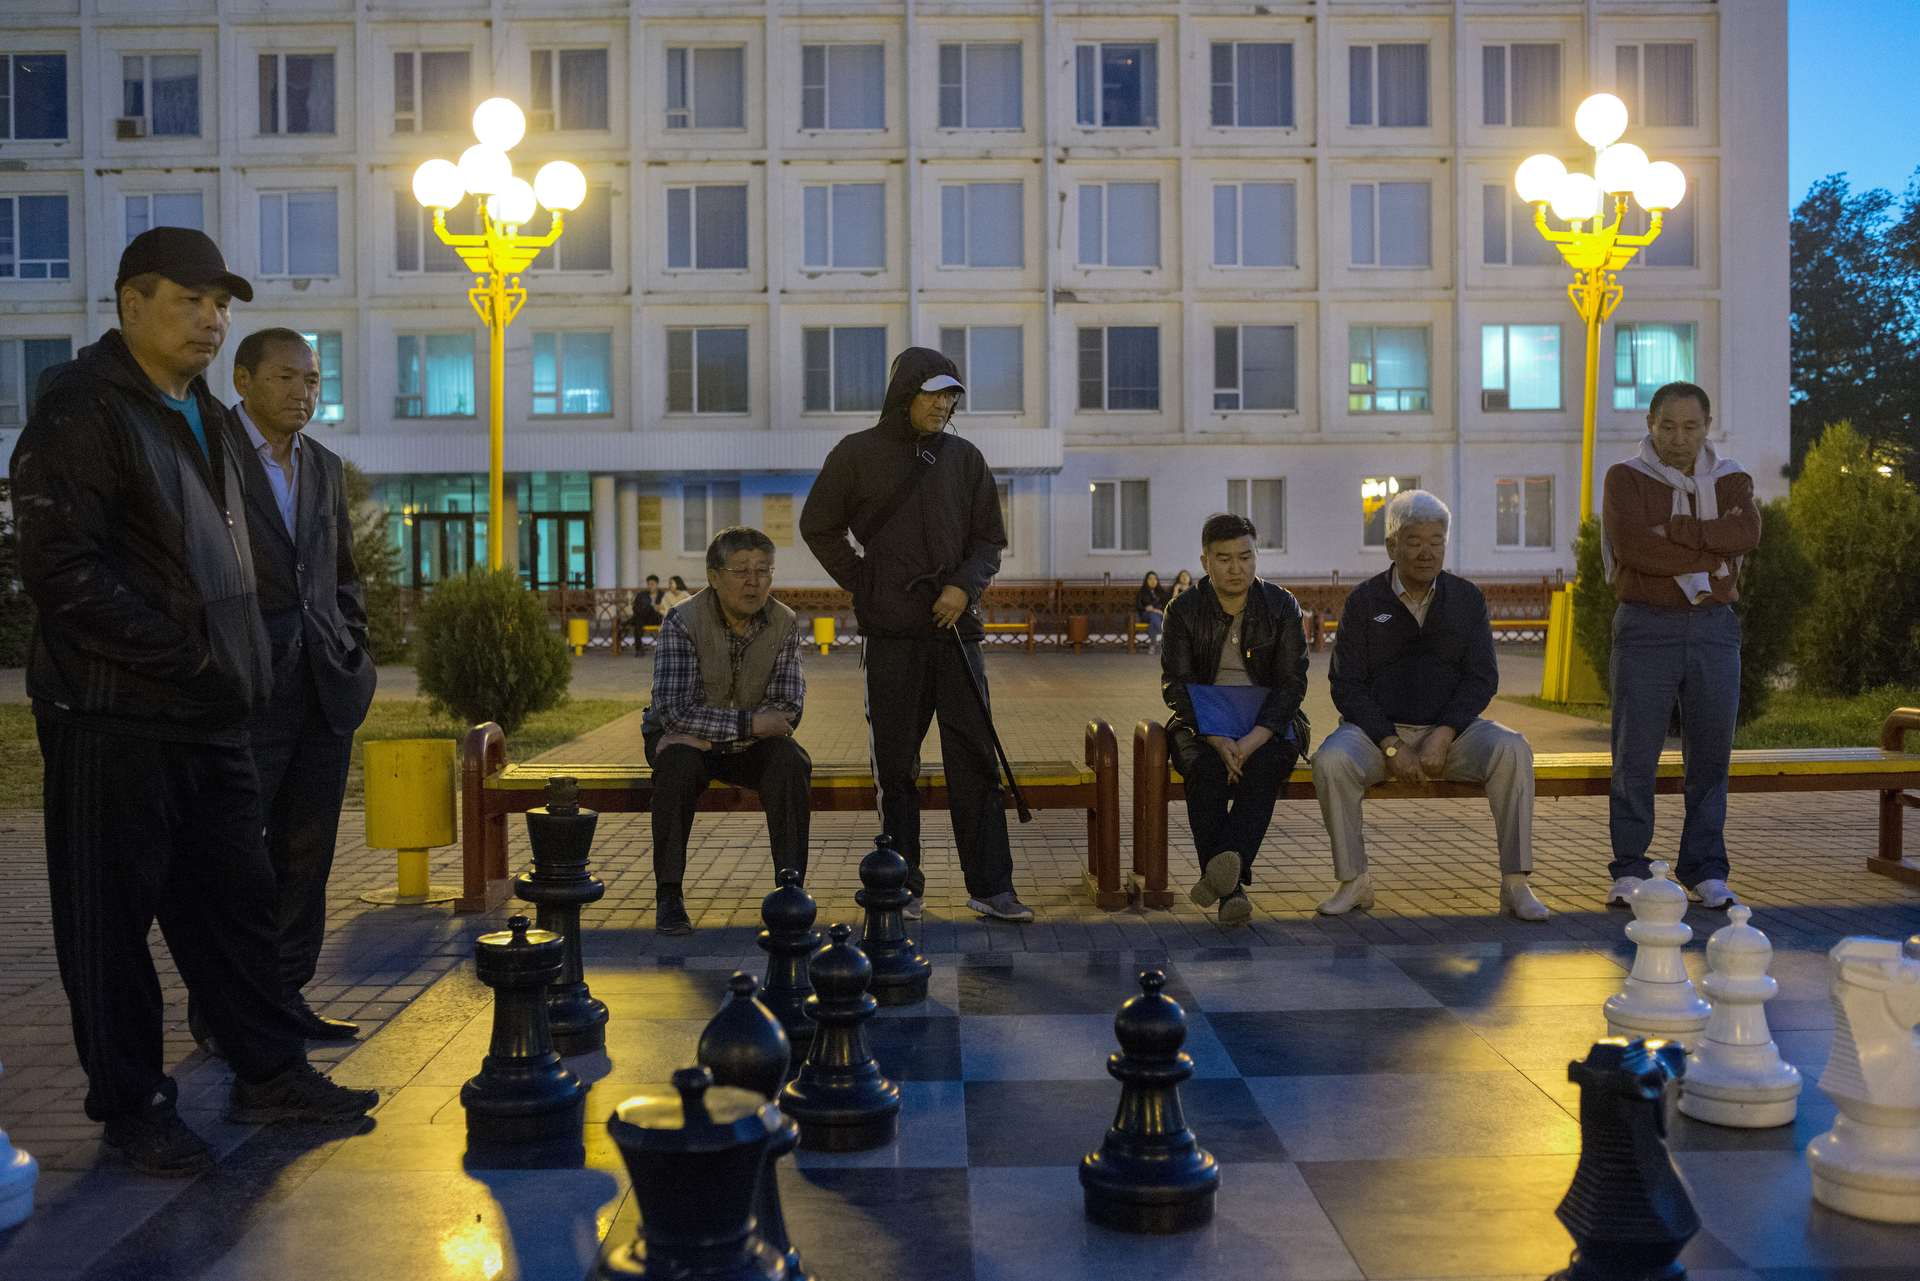  Men playing chess in the central square of Lenin. Chess became the national sport in Kalmykia after the former republic's president, Kirsan Ilyumzhinov, actual president of the FIDE, and who ruled the republic for 17 years, encouraged chess at all s